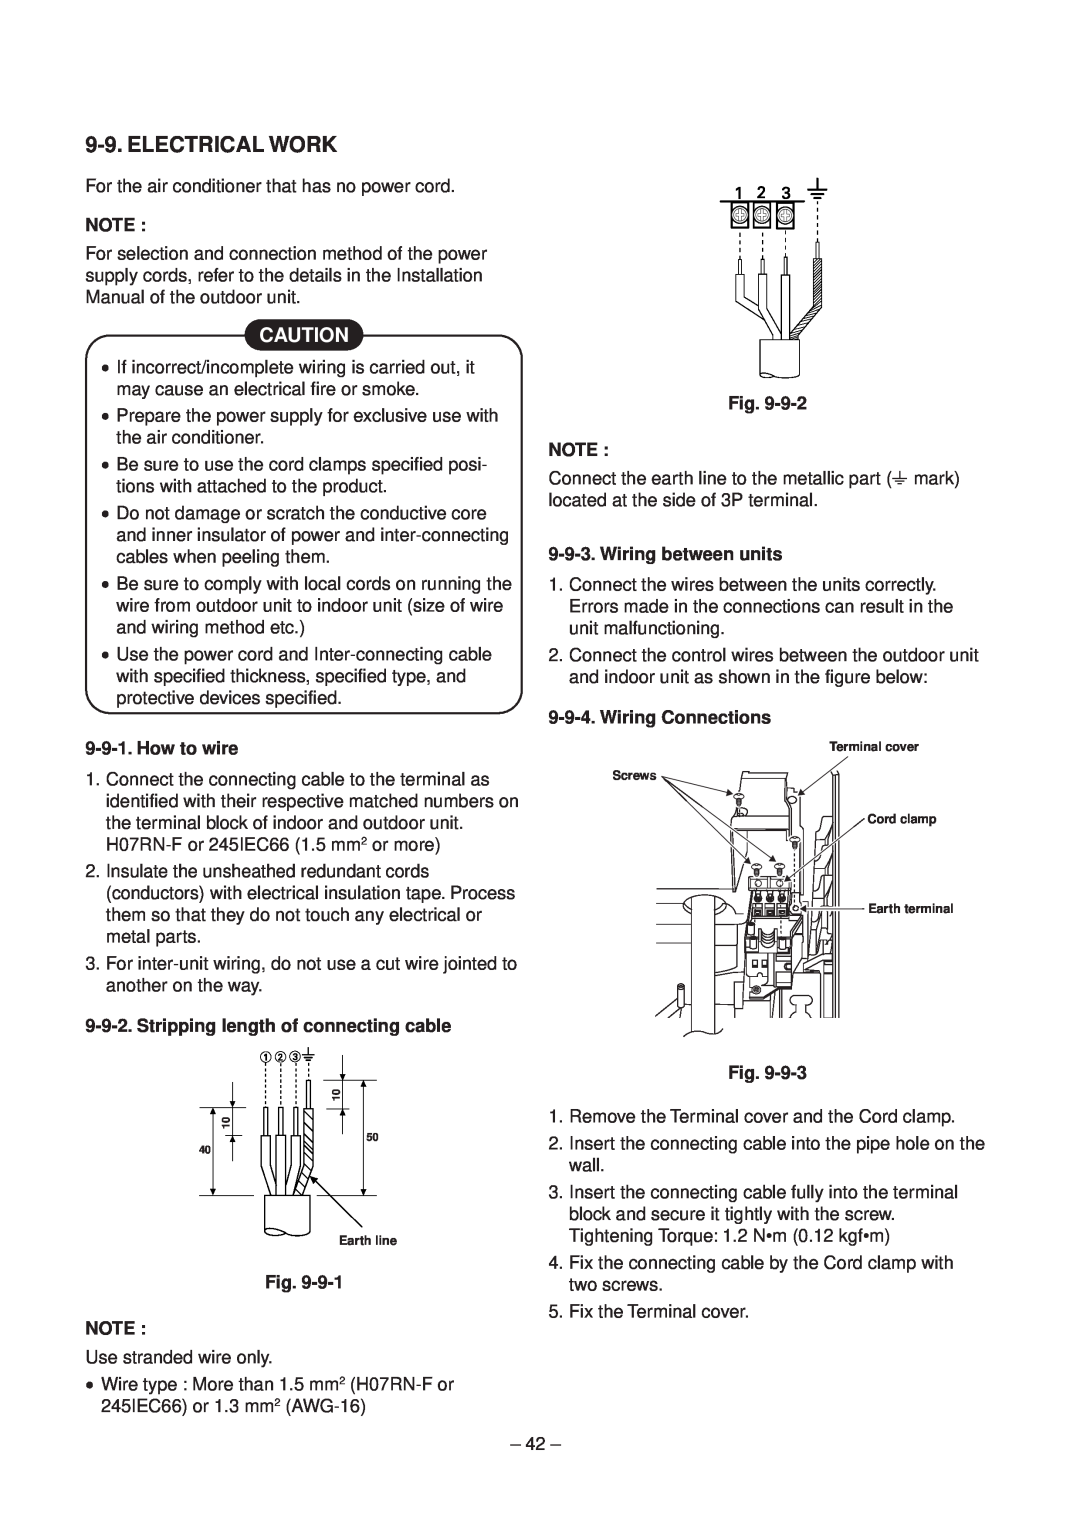 Toshiba RAV-SM800XT-E, RAV-SM560XT-E service manual Electrical Work, Wiring between units, Wiring Connections, How to wire 